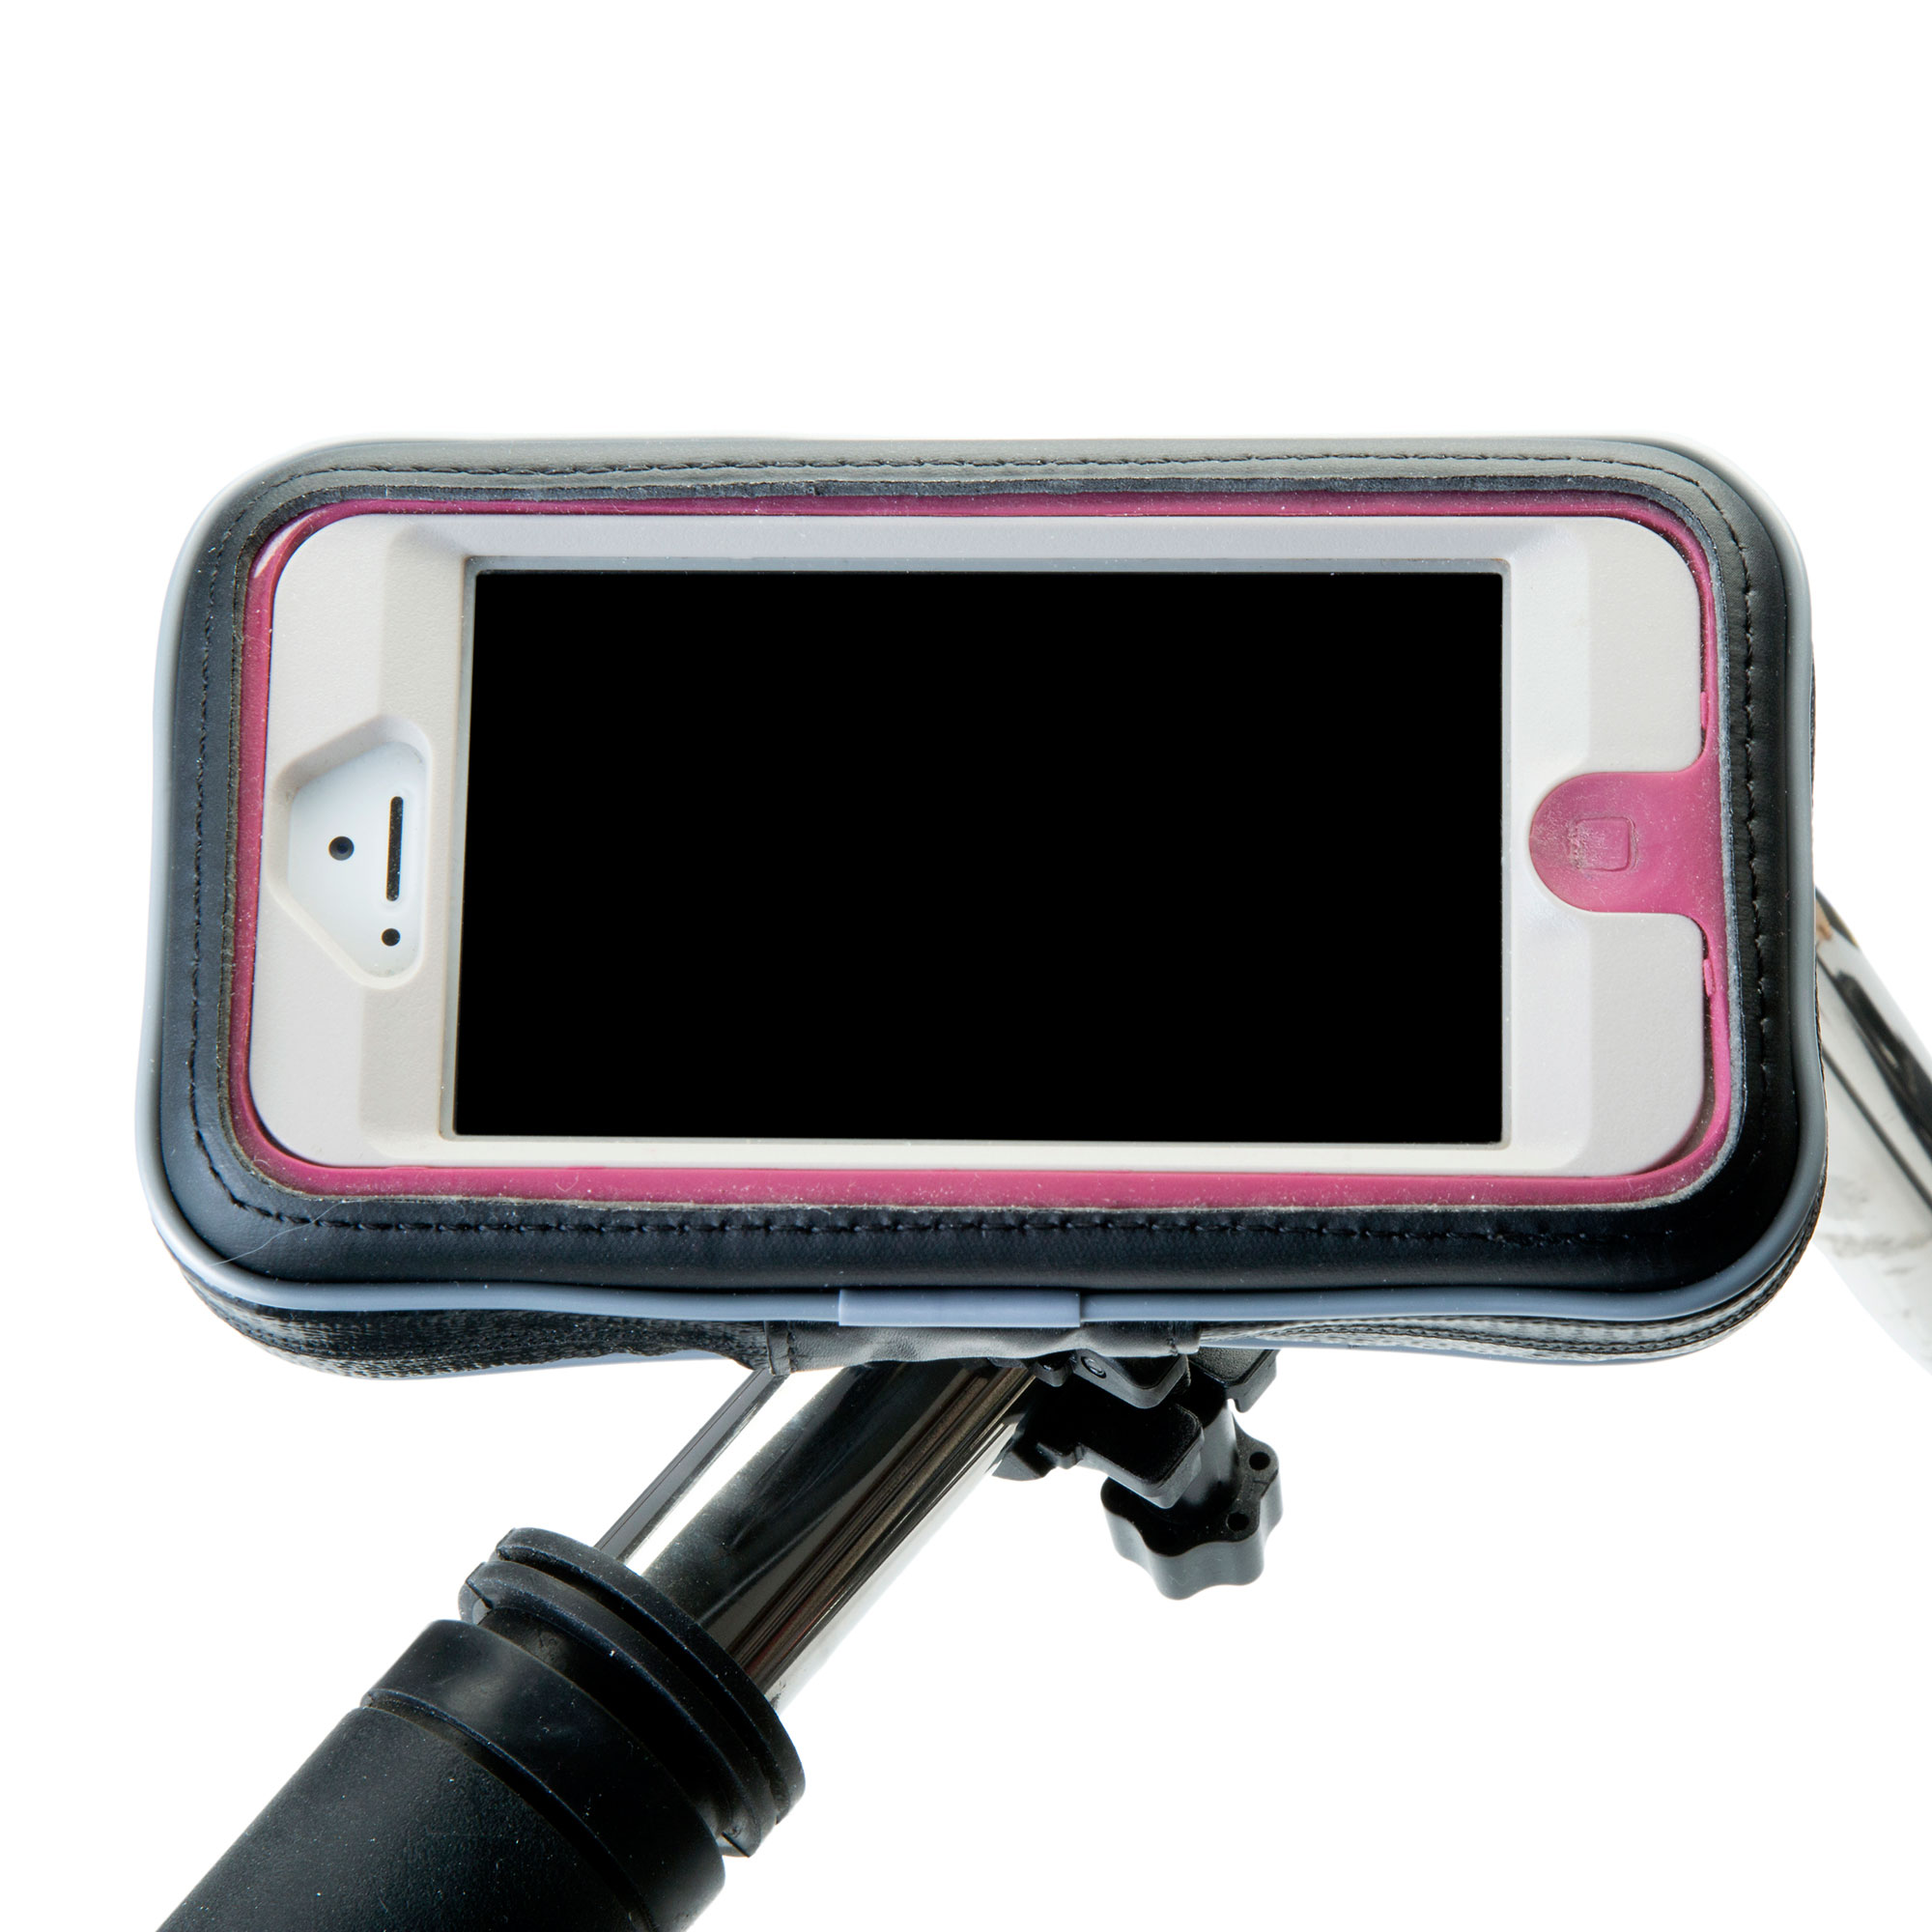 Heavy Duty Weather Resistant Bicycle / Motorcycle Handlebar Mount Holder Designed for the Sony Ericsson U5